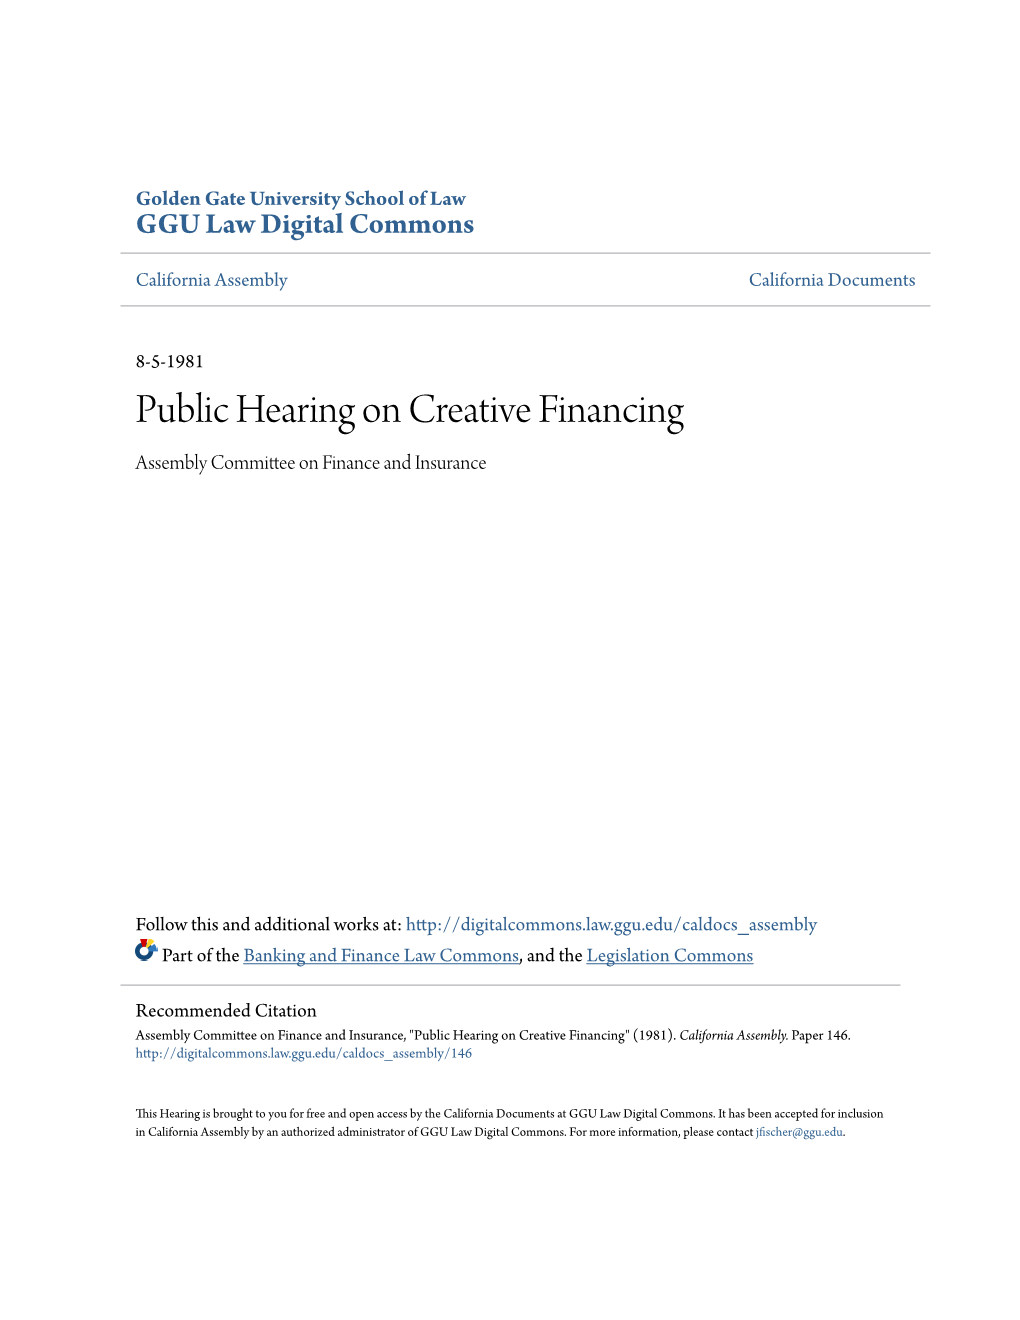 Public Hearing on Creative Financing Assembly Committee on Finance and Insurance